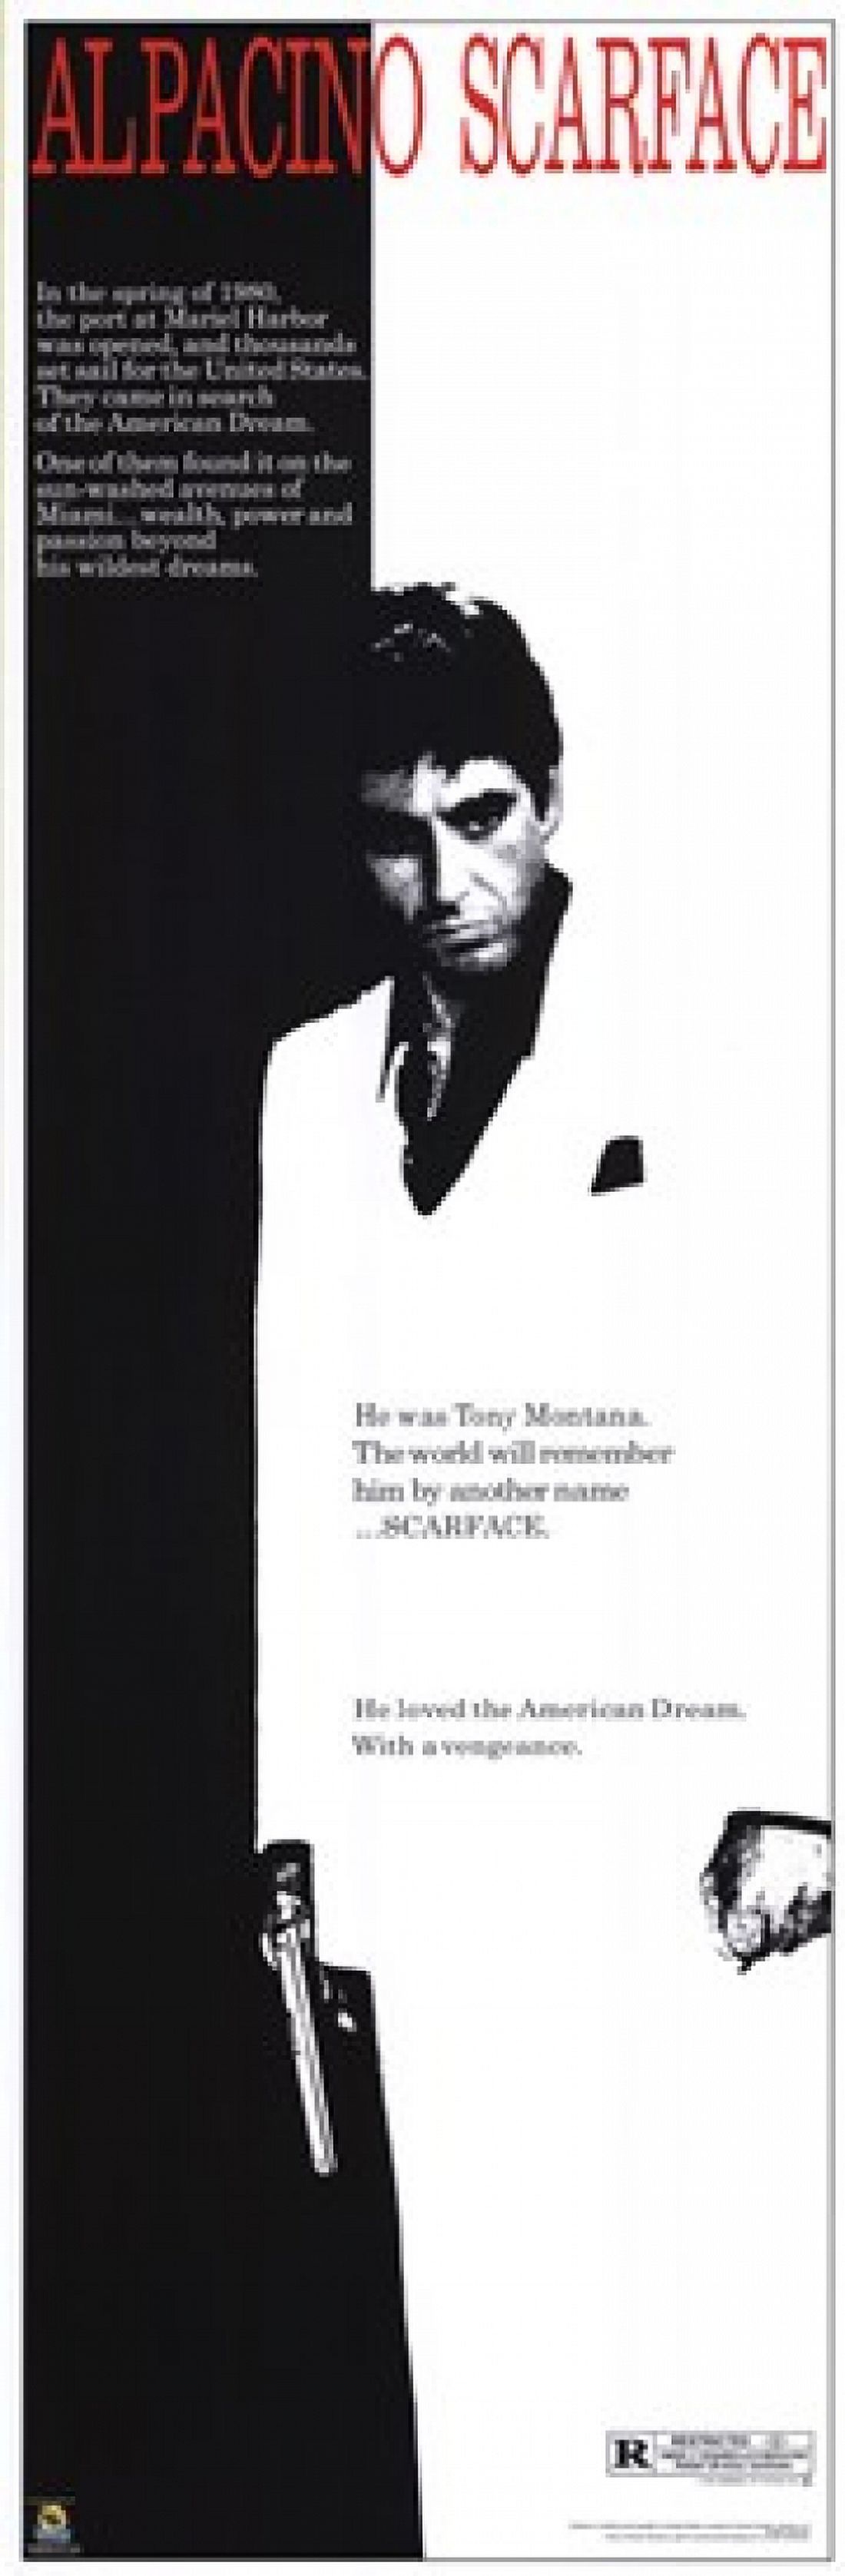 Scarface Poster (12 x 36) - image 1 of 1